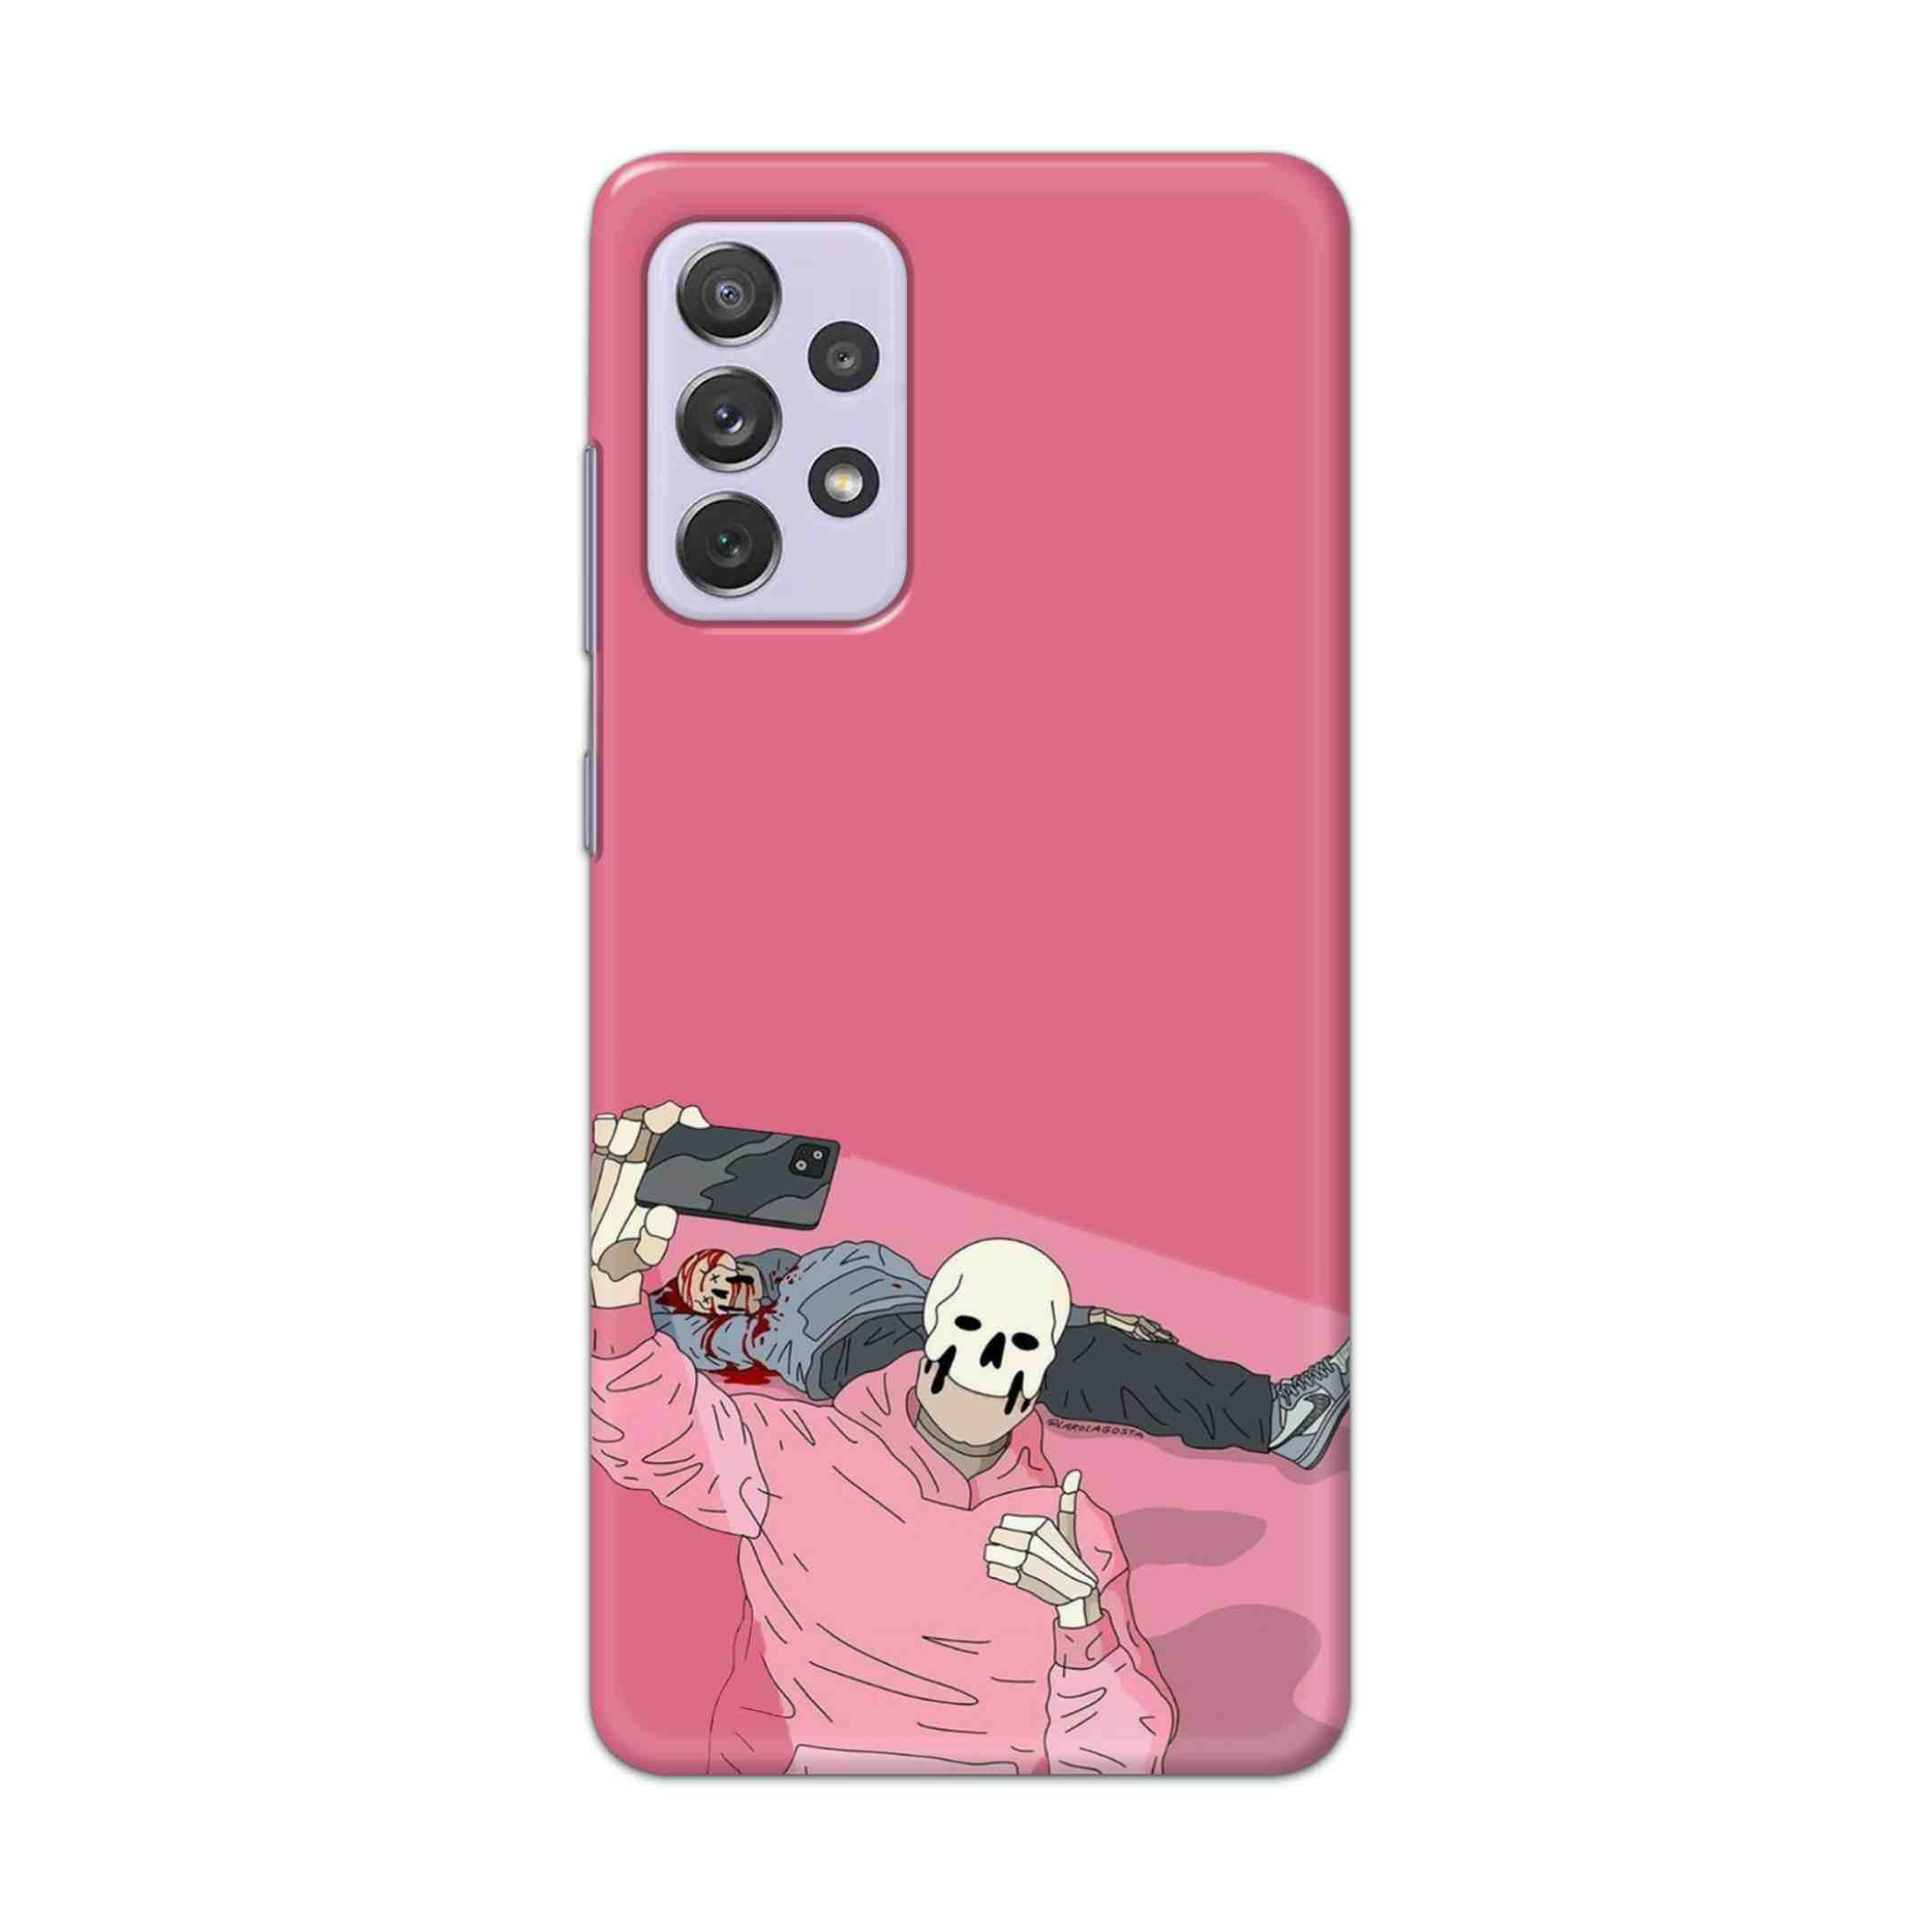 Buy Selfie Hard Back Mobile Phone Case Cover For Samsung Galaxy A72 Online